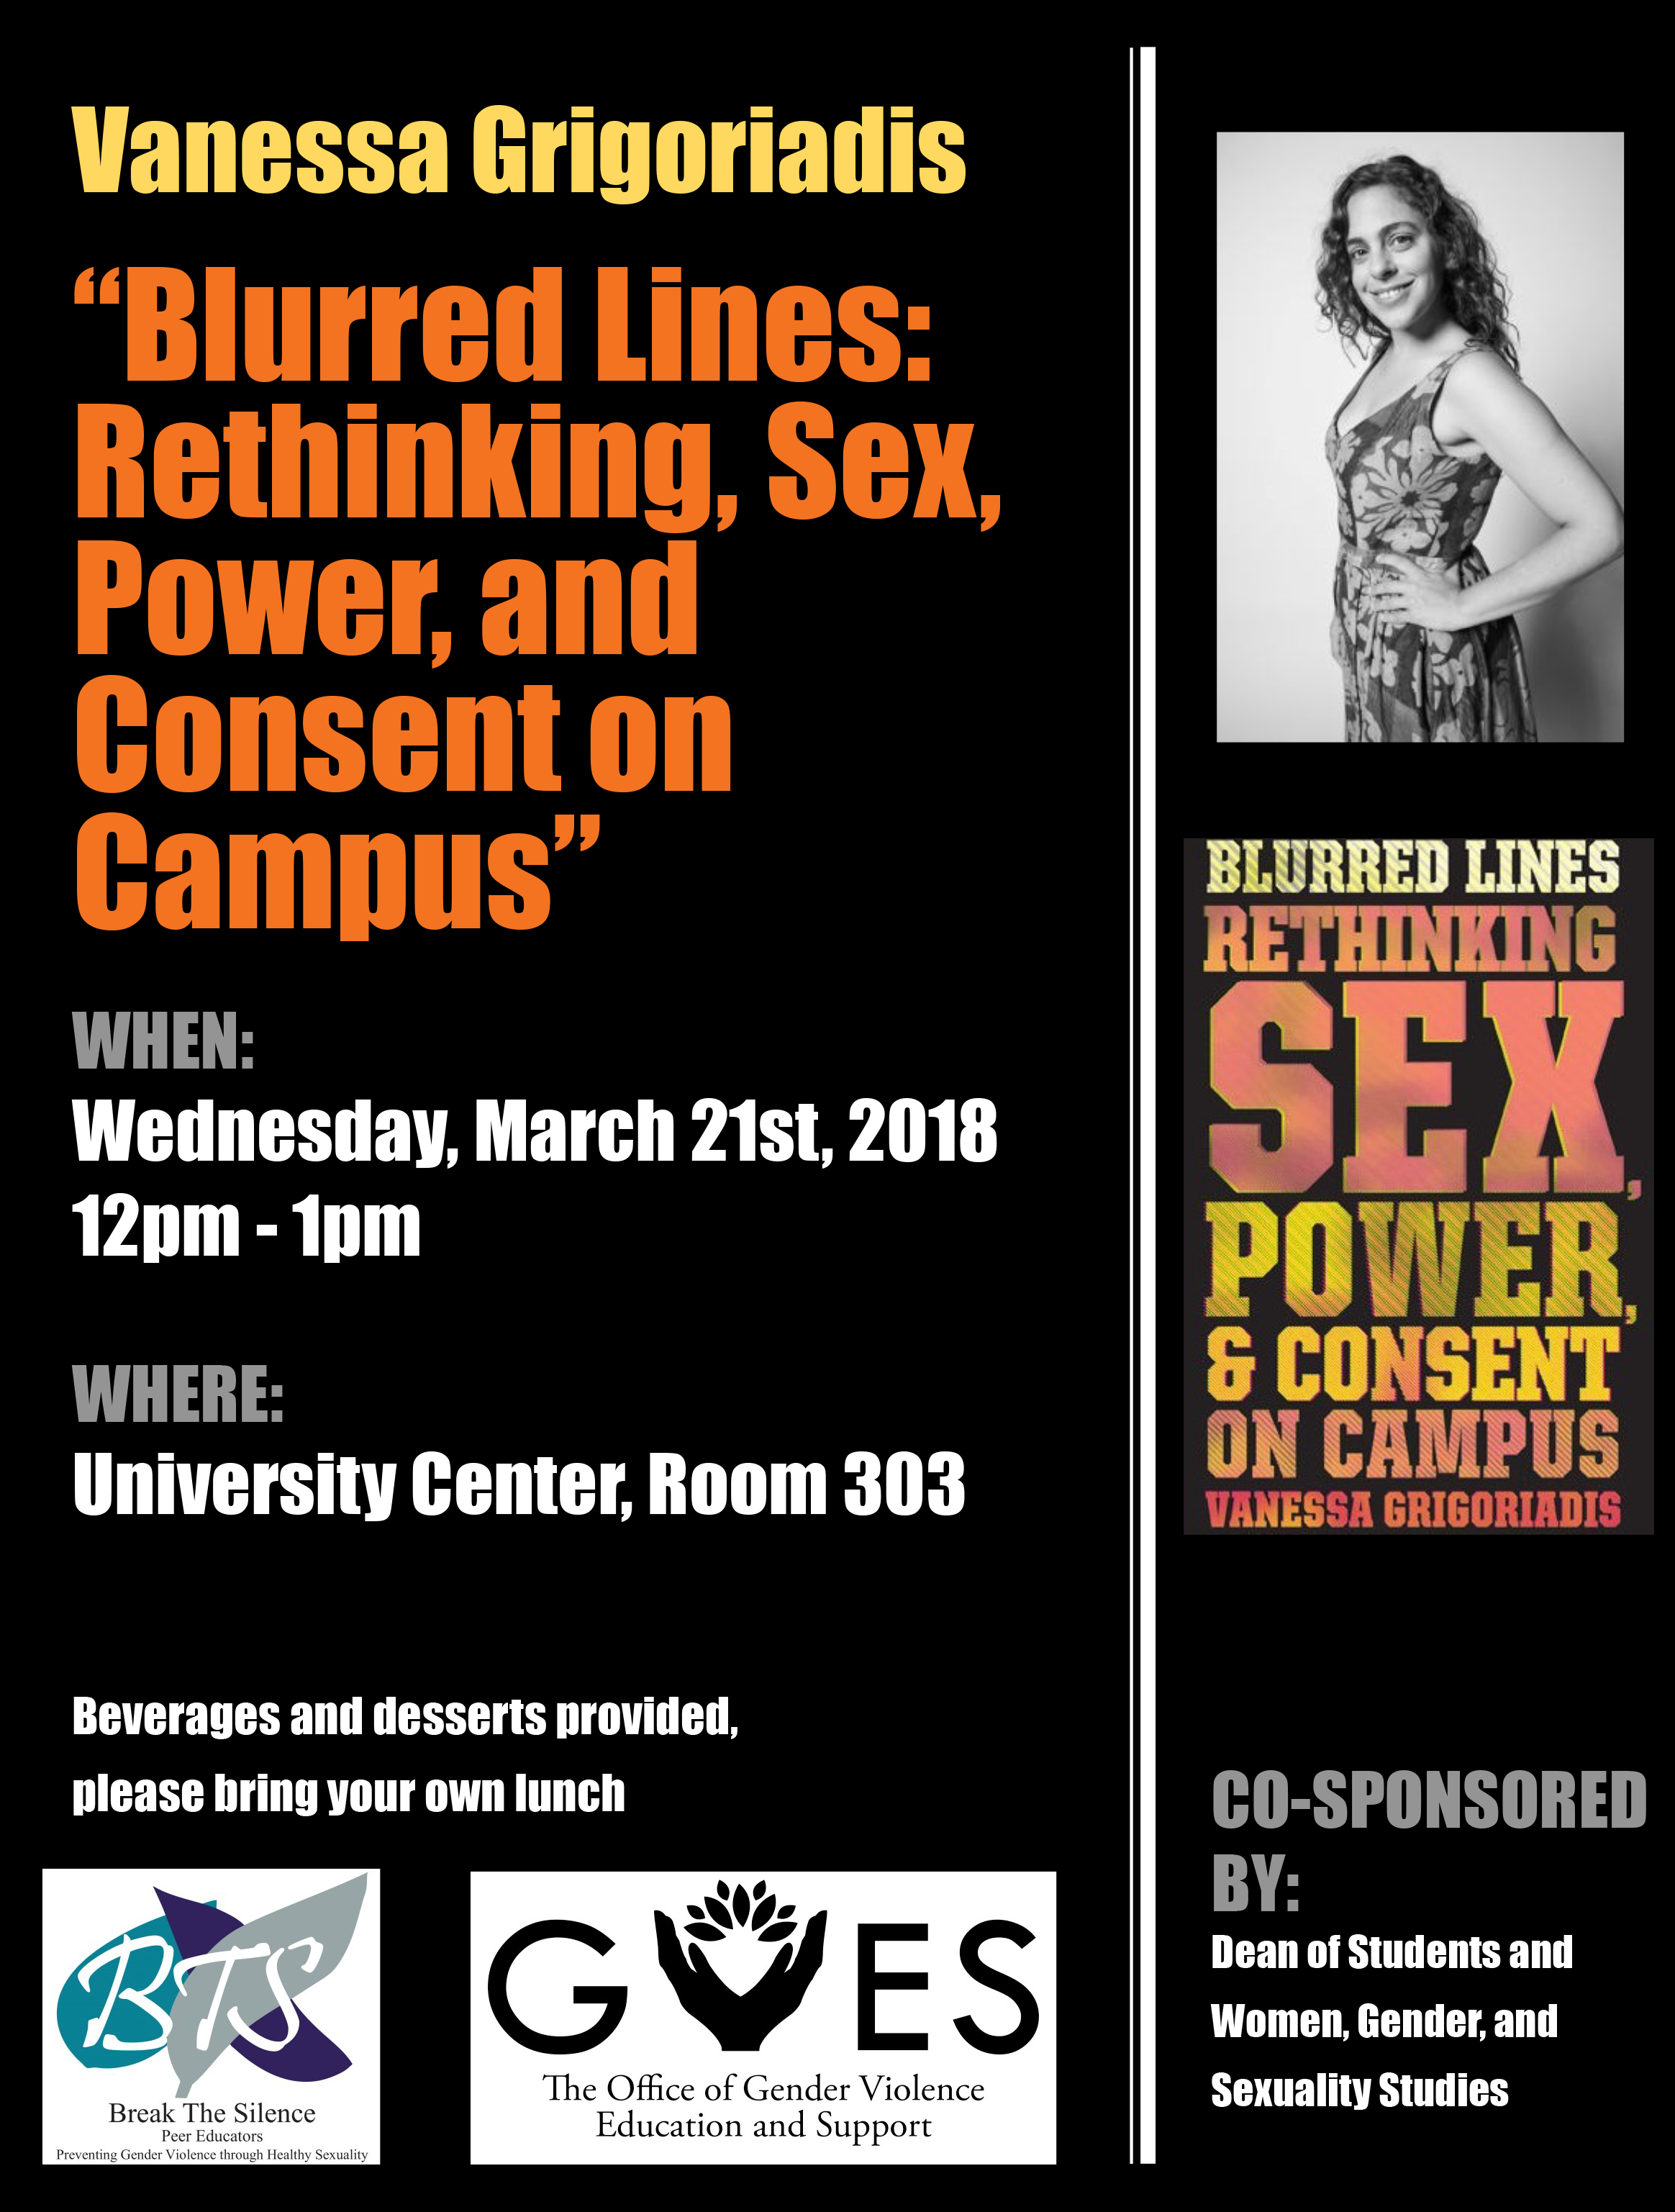 Book Club Blurred Lines Rethinking Sex Power And Consent On Campus Women Gender And